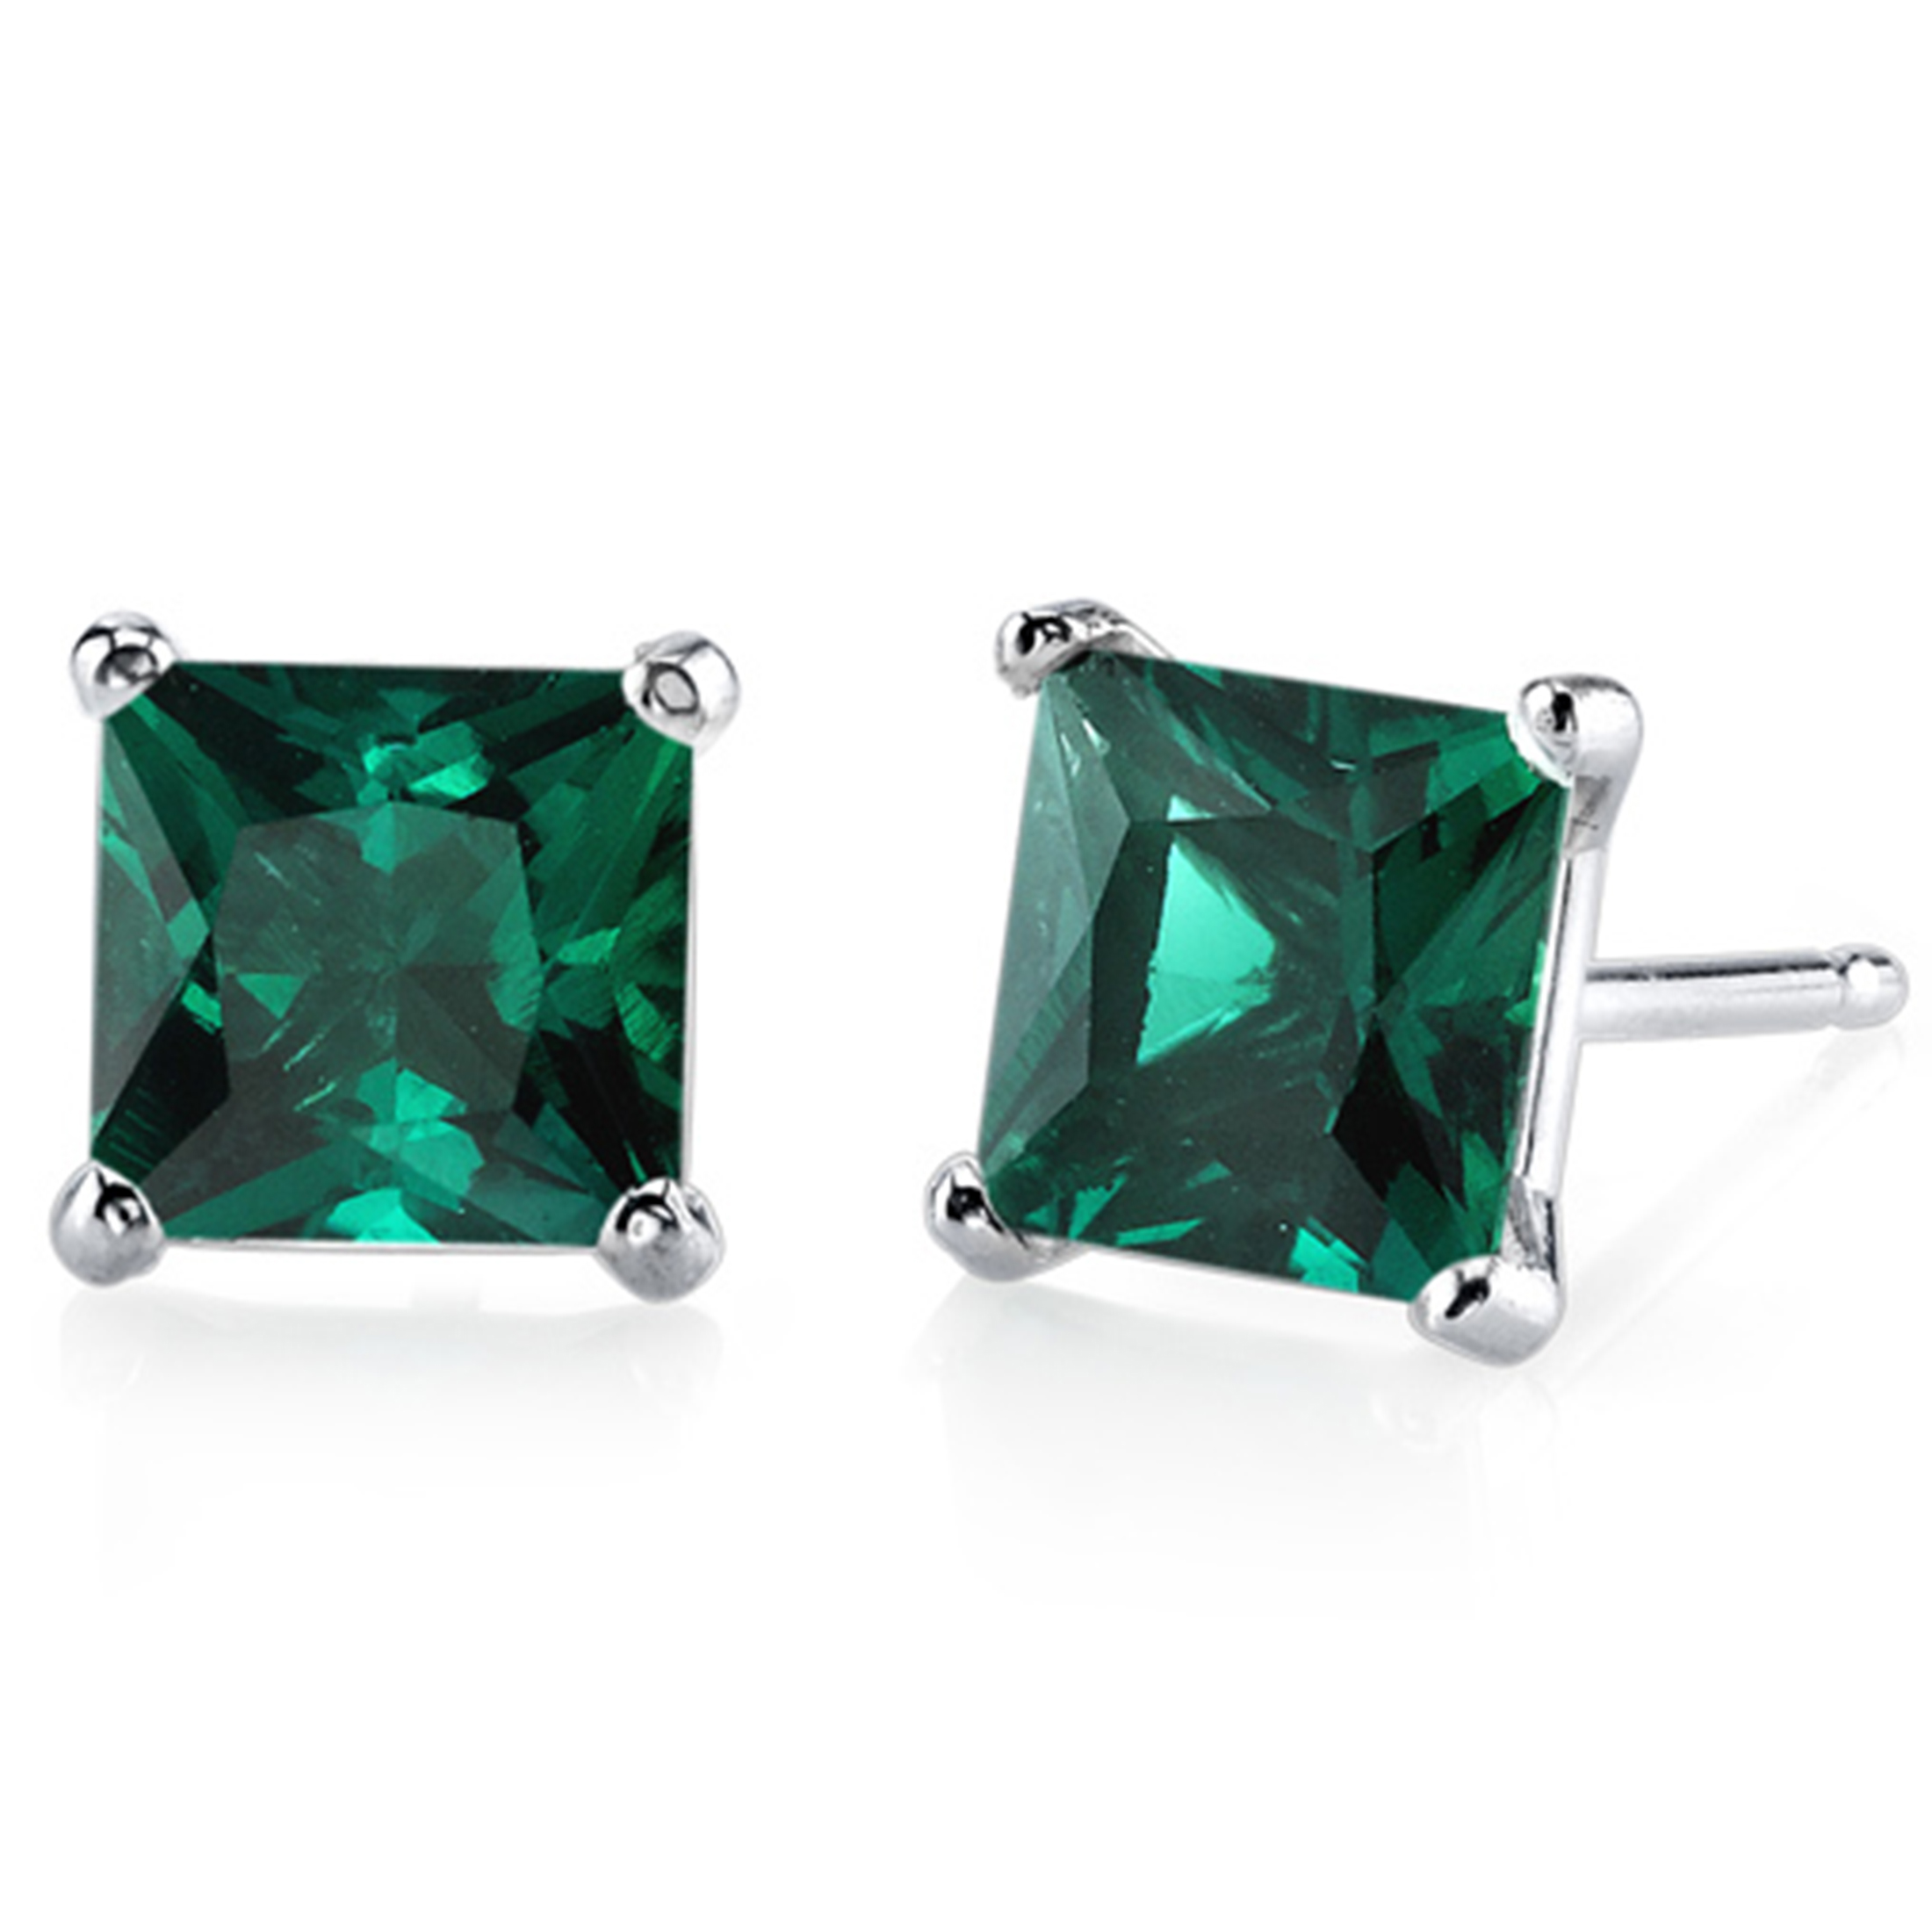 Bonjour Jewelers 14k White Gold Over Sterling Silver  1 Ct Princess Emerald Stud Earrings Pack Of 2.